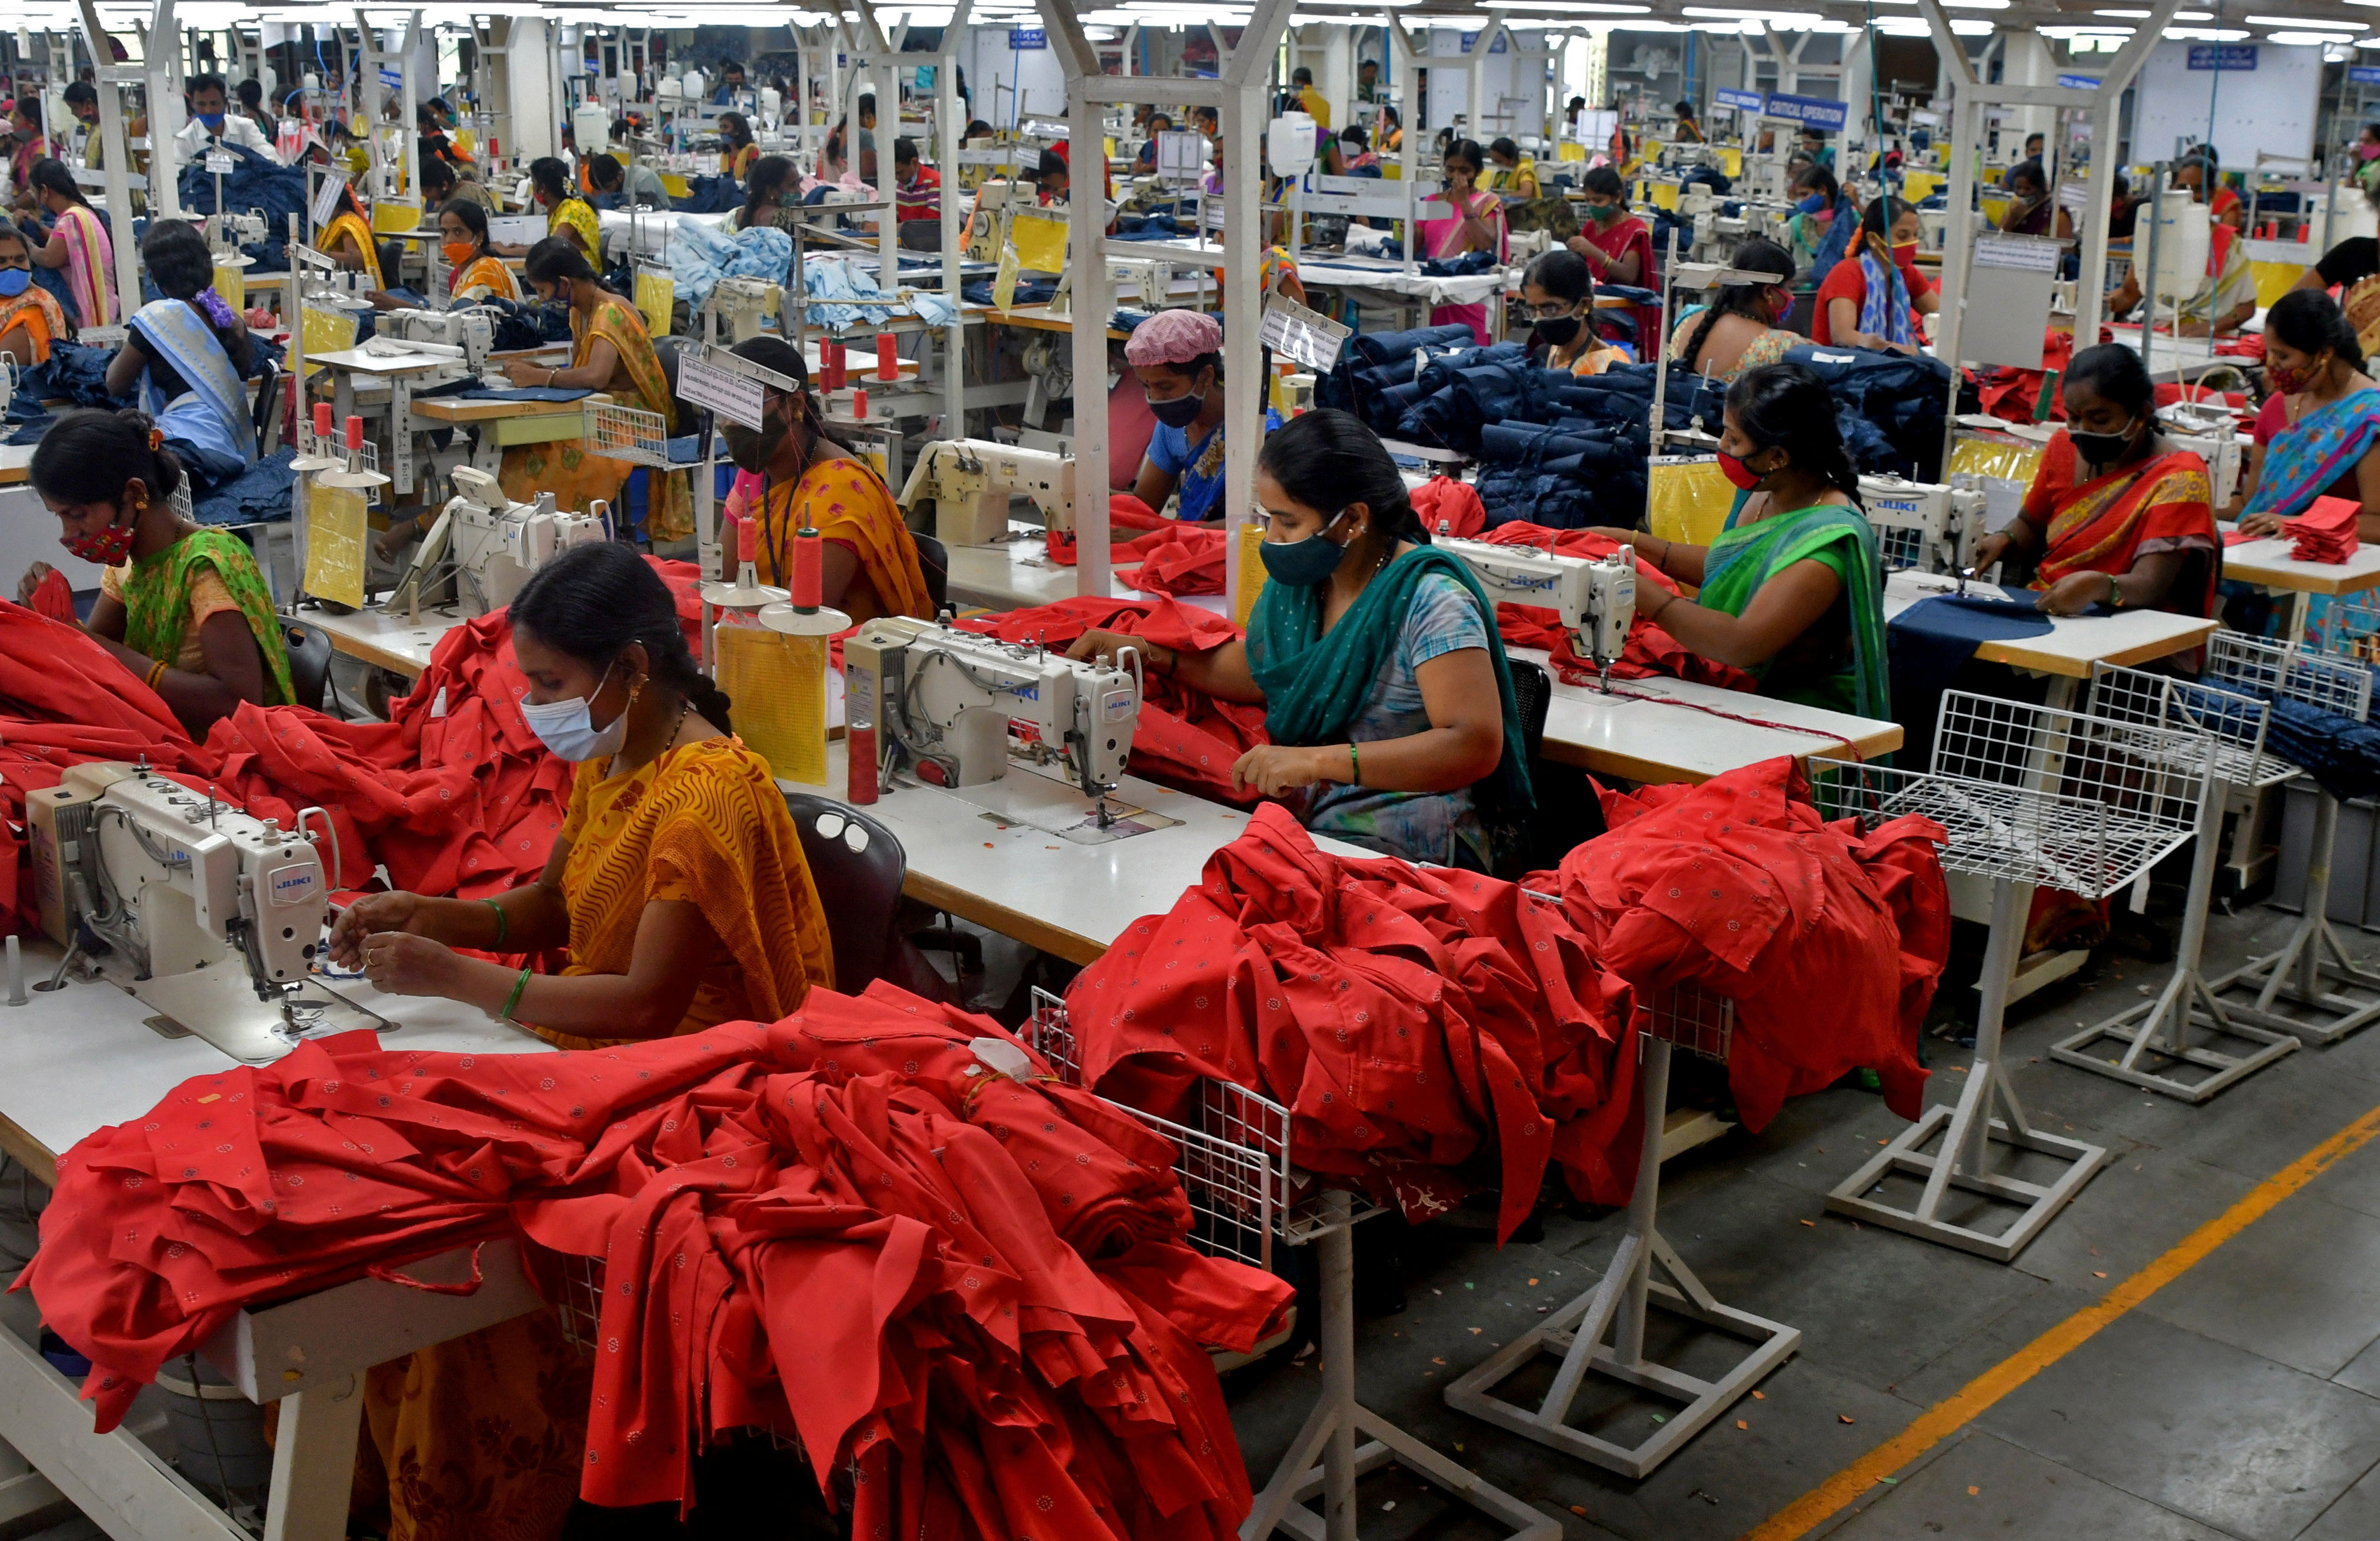  India's textile industry revs up, giving hope on jobs for 